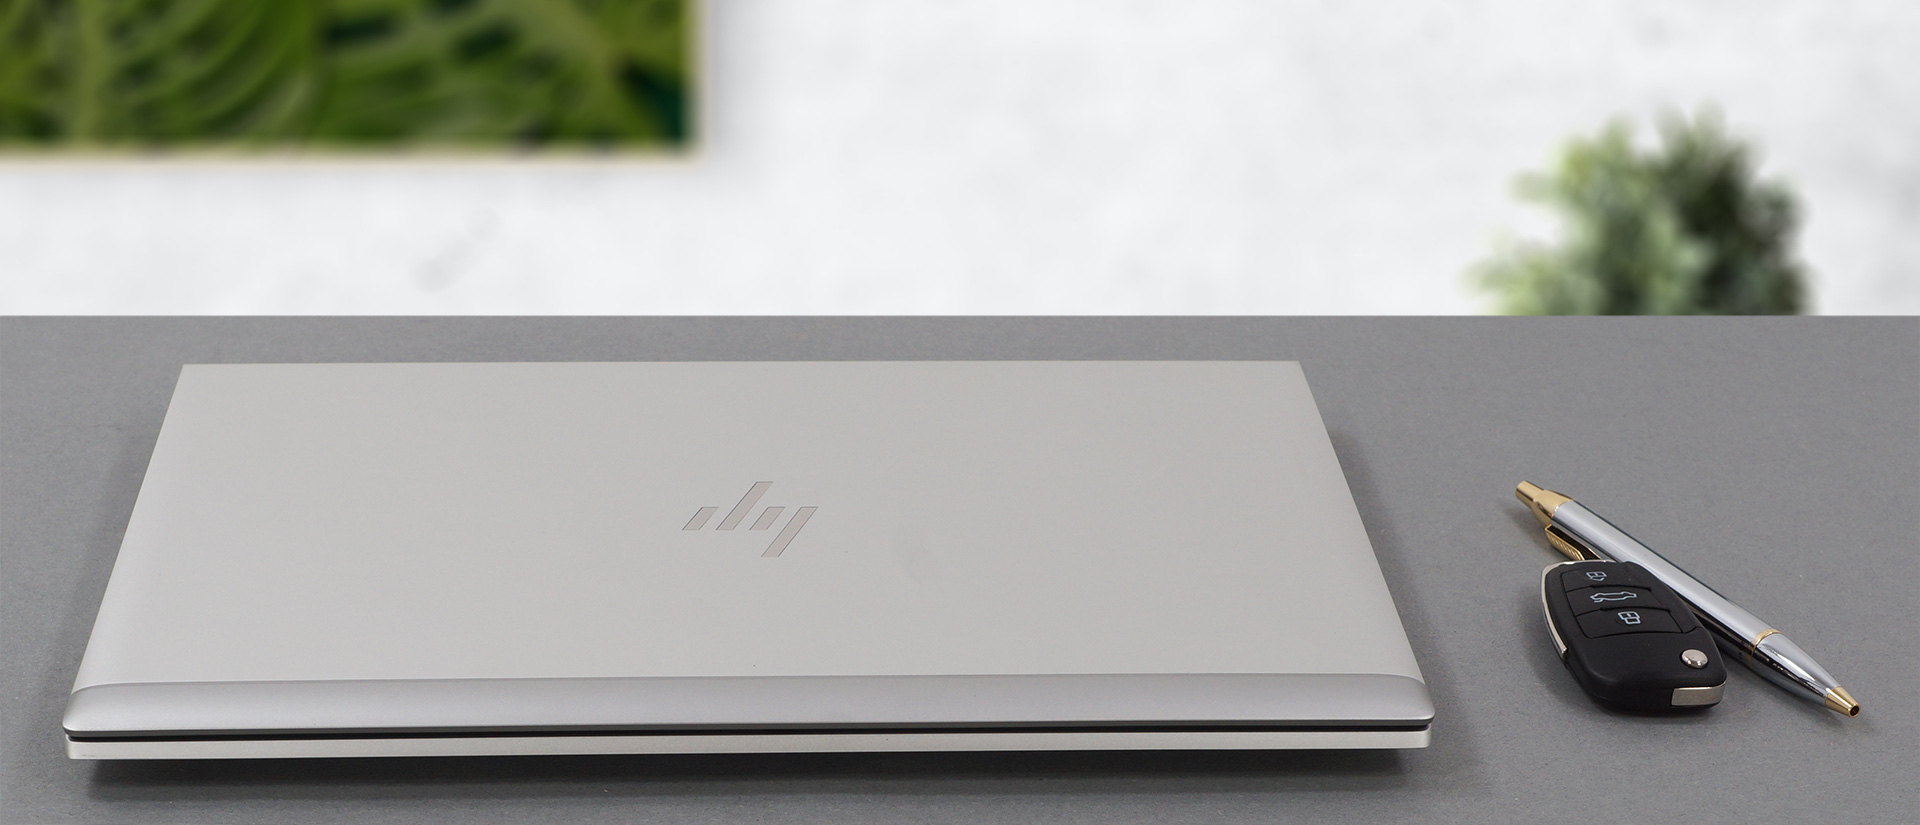 HP EliteBook X360 830 G7 Review: Convertible Design, 9hours Battery life